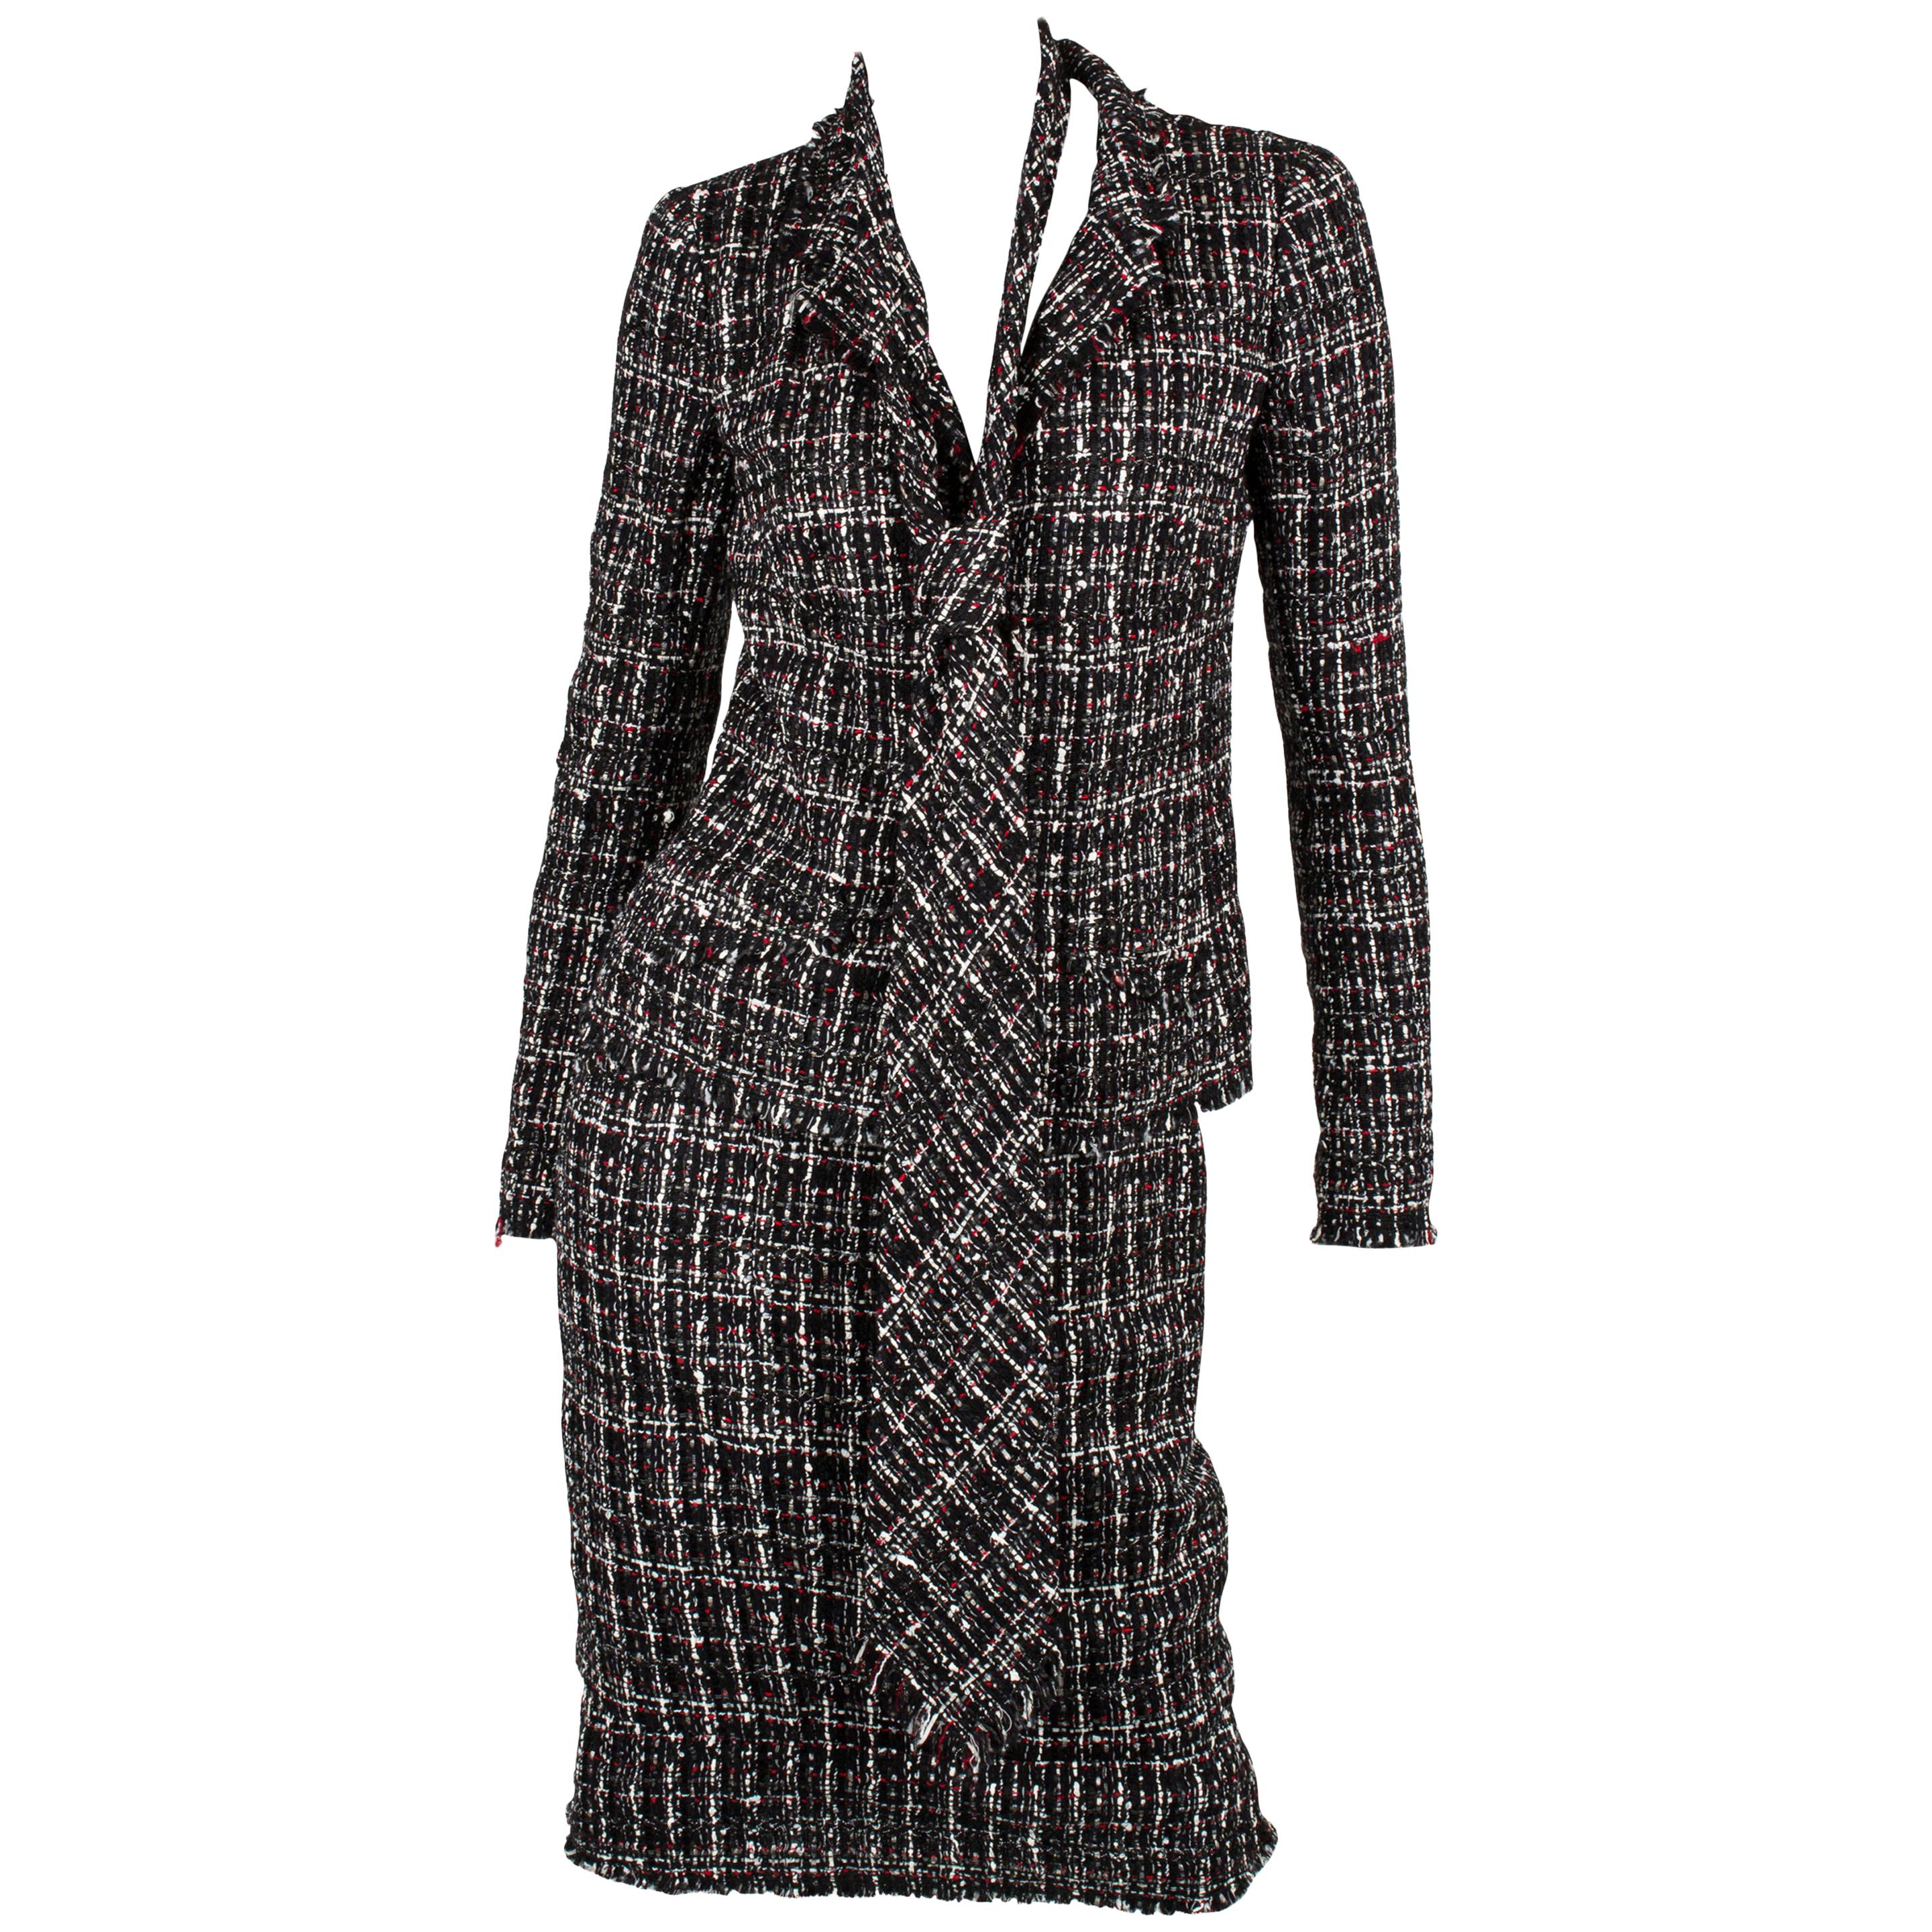 Chanel Suit 3-pcs Jacket, Skirt & Tie - black/white/grey/red For Sale